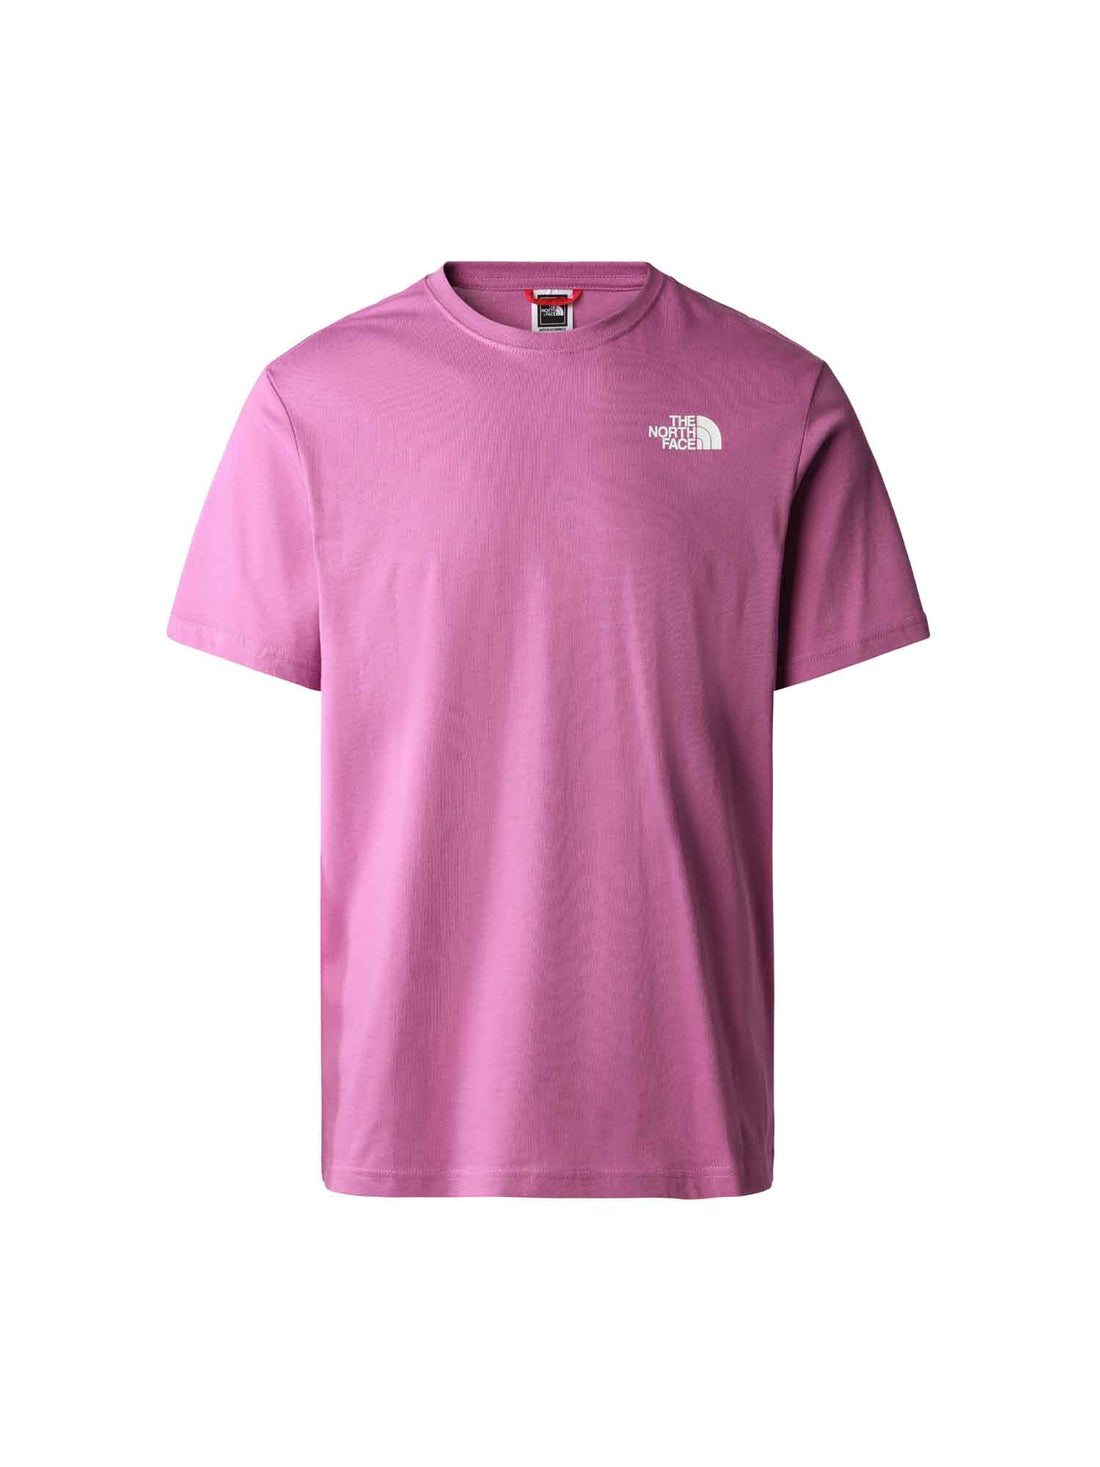 The North Face T-shirt NF0A2TX2